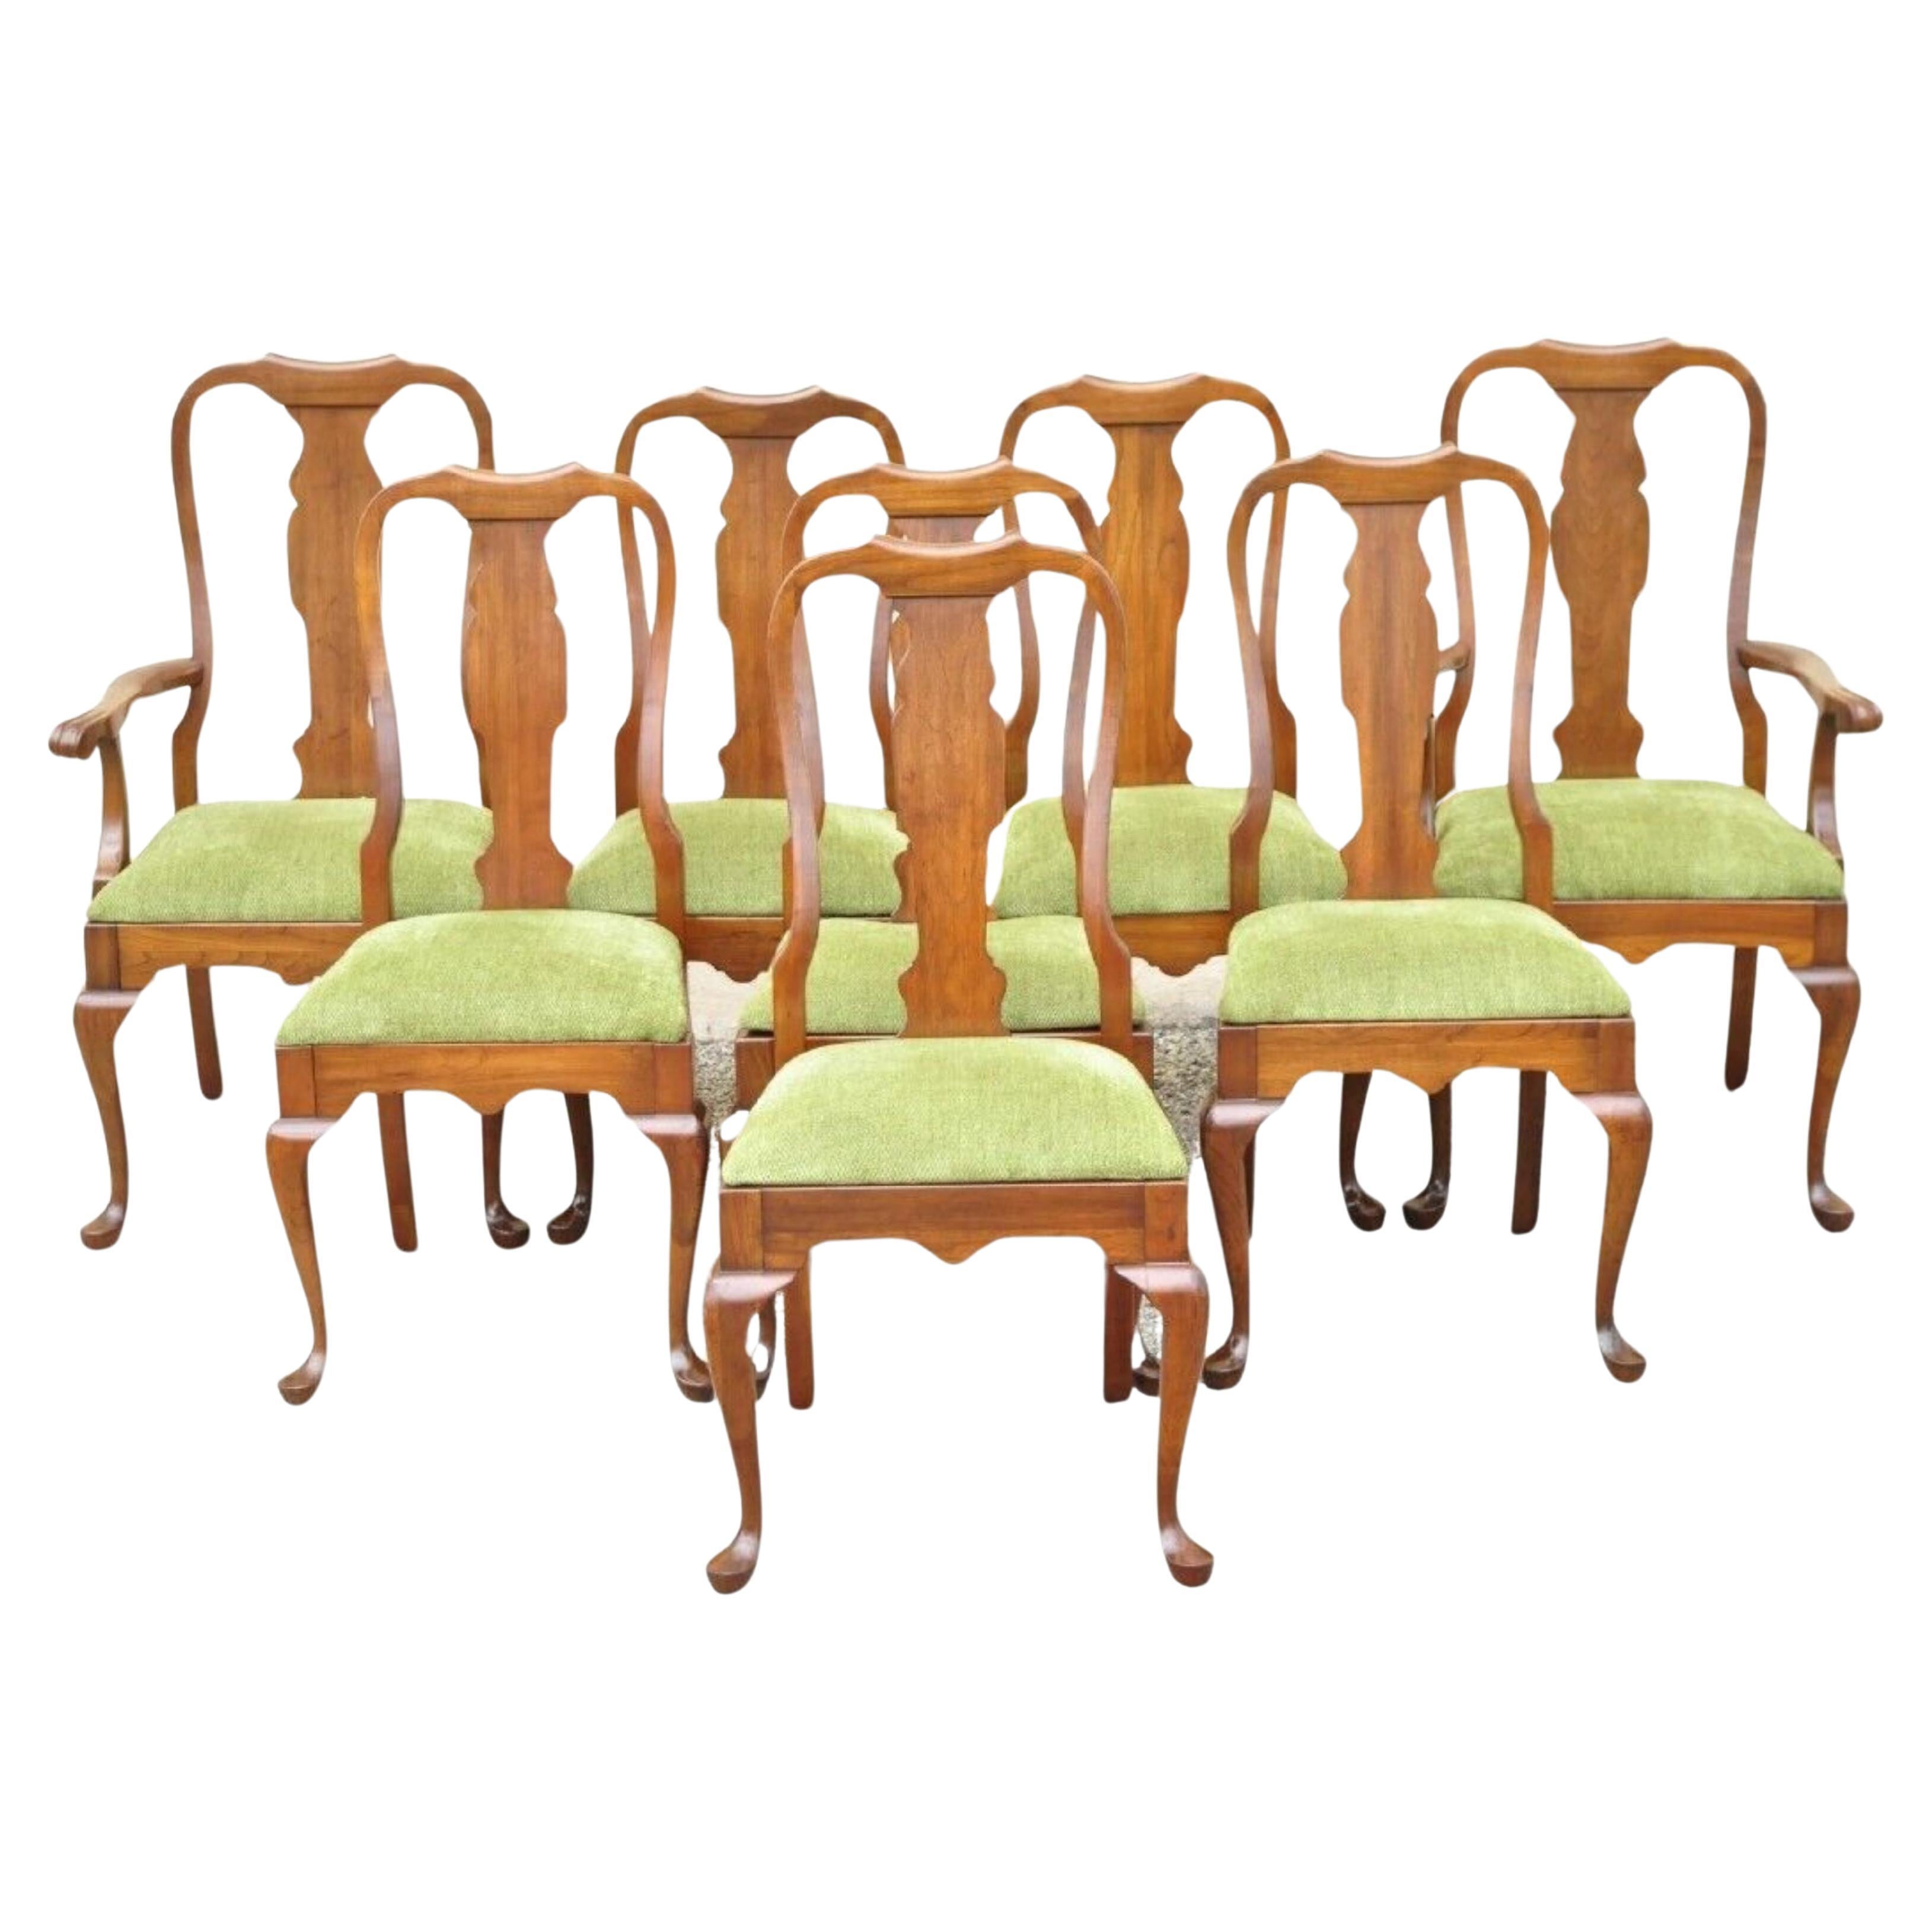 Pennsylvania House Cherry Wood Queen Anne Style T-Back Dining Chairs - Set of 8 For Sale